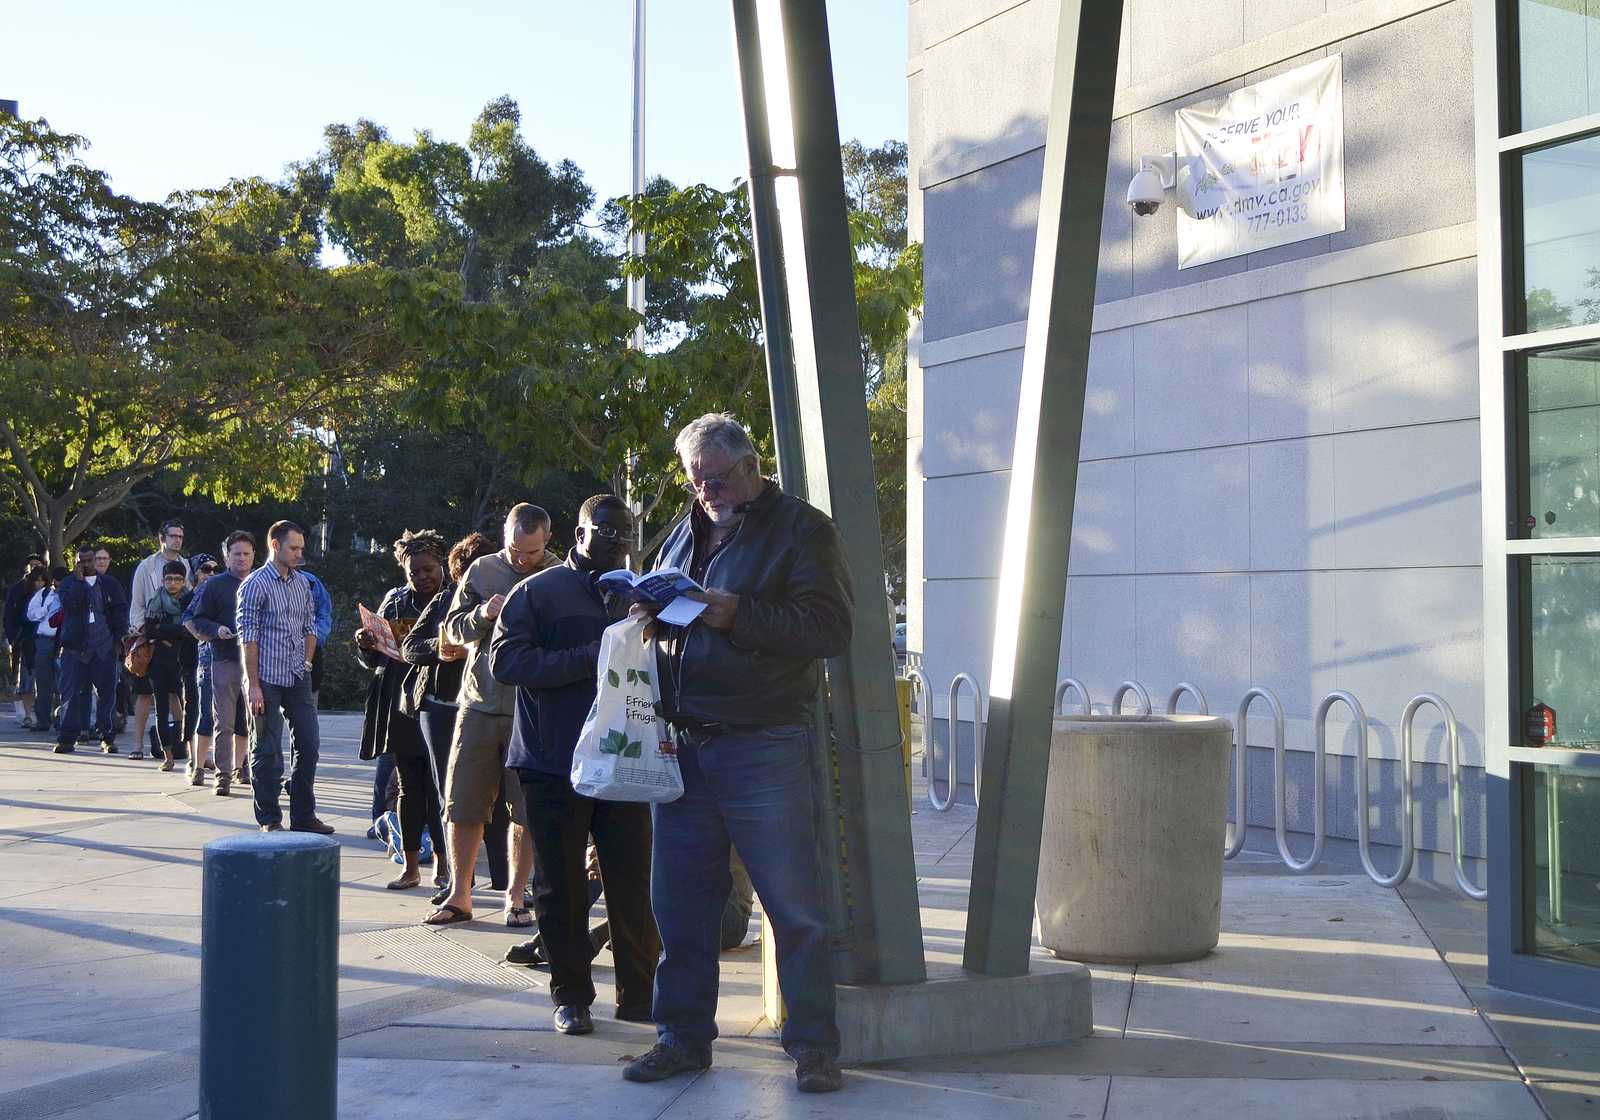 People stand in line at the Claremont DMV waiting for the doors to open at 8 a.m. Monday, Sept. 23, 2013 in Oakland, Calif. Photo by Amanda Peterson / Xpress 